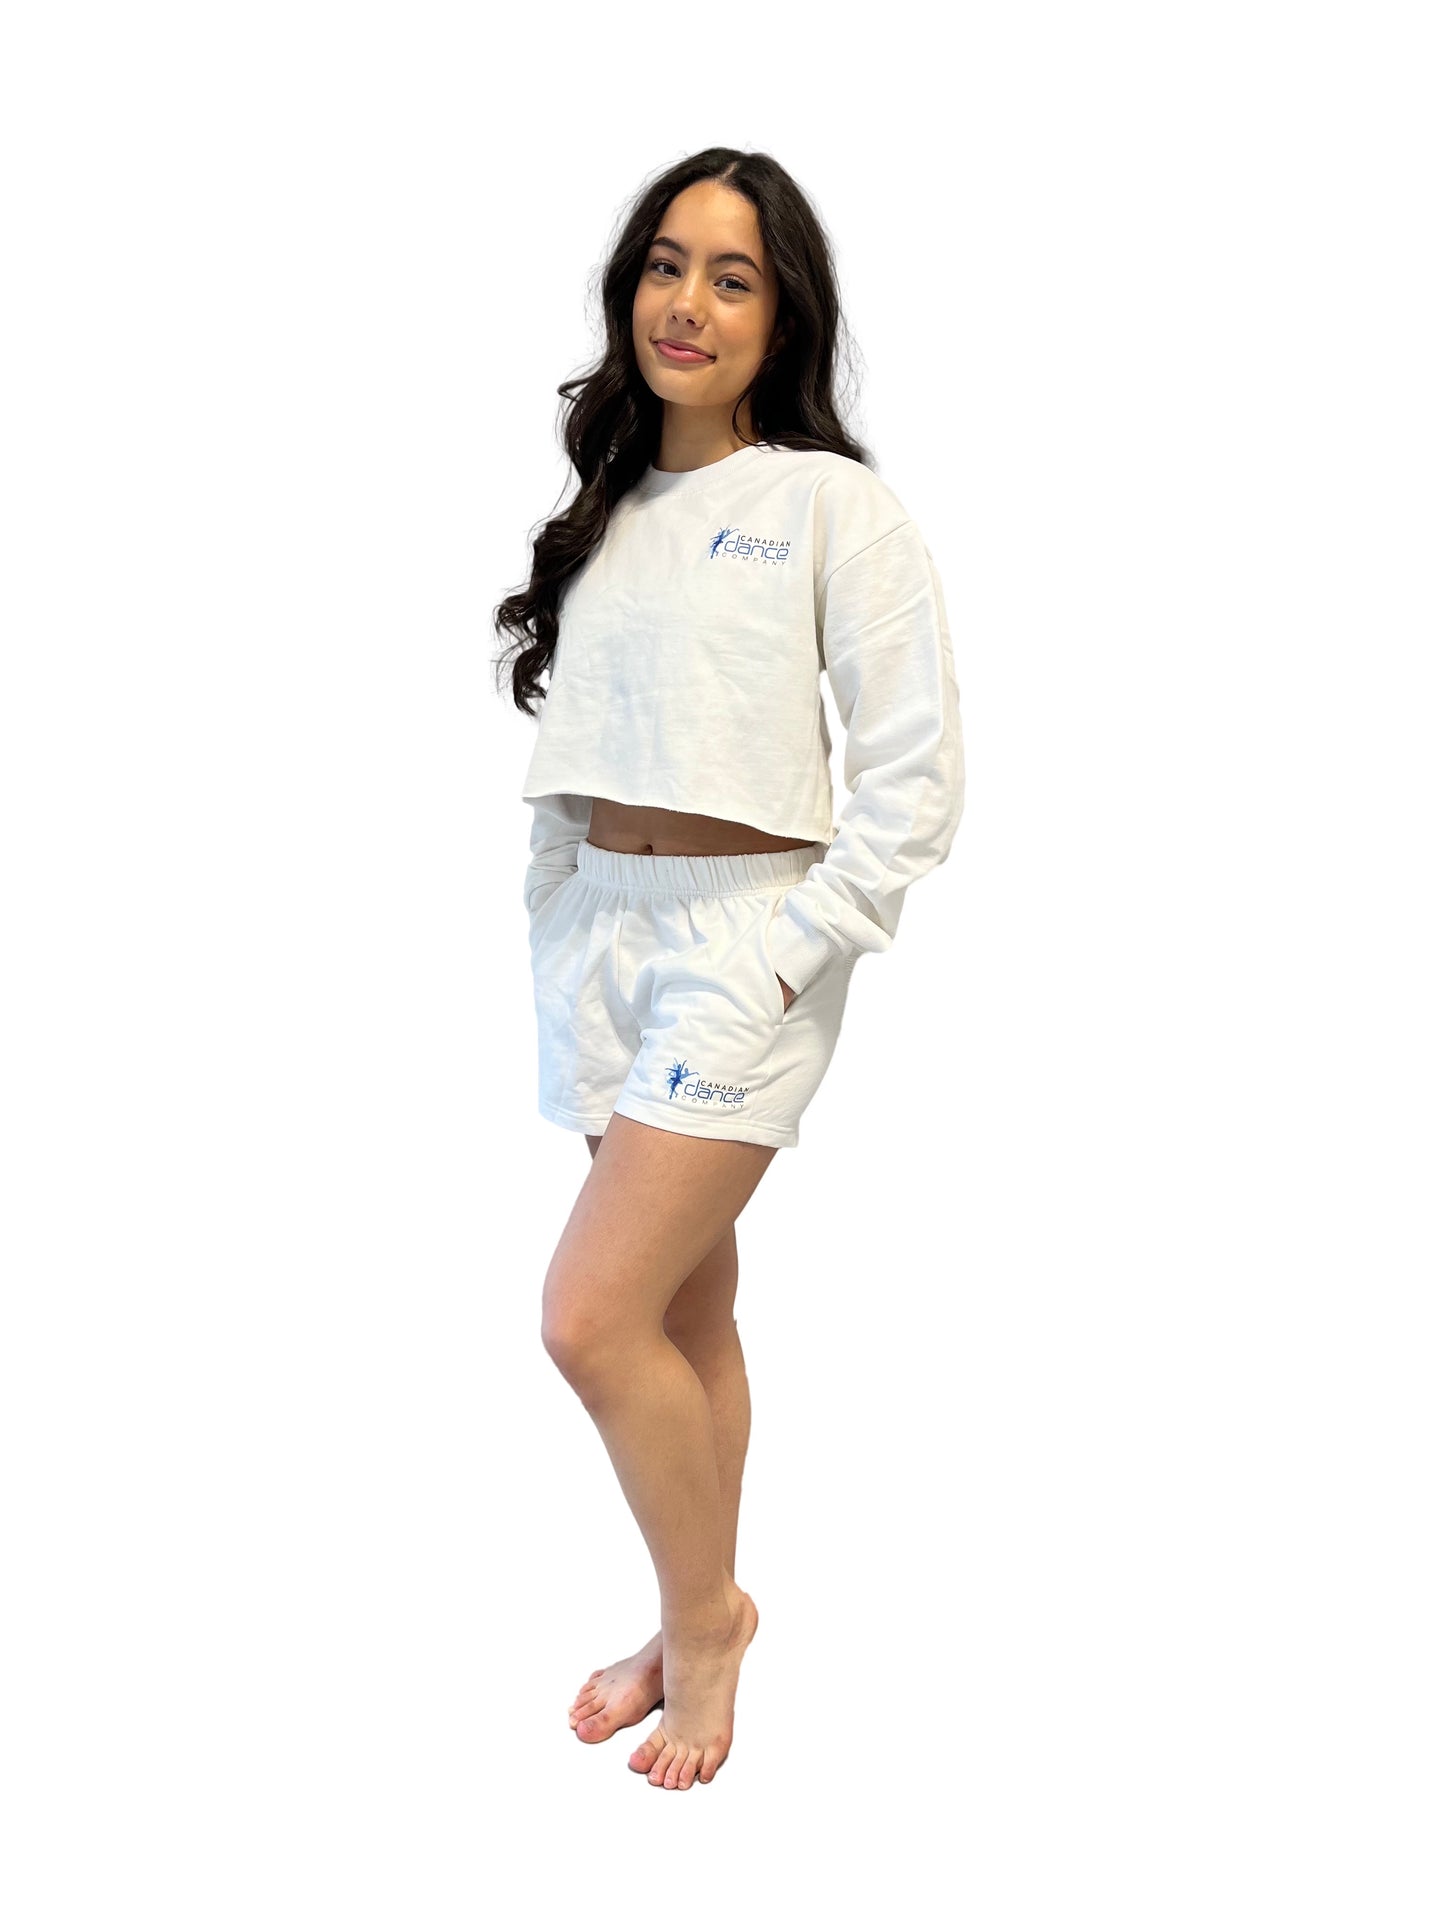 CDC White Youth Crop Crew Top